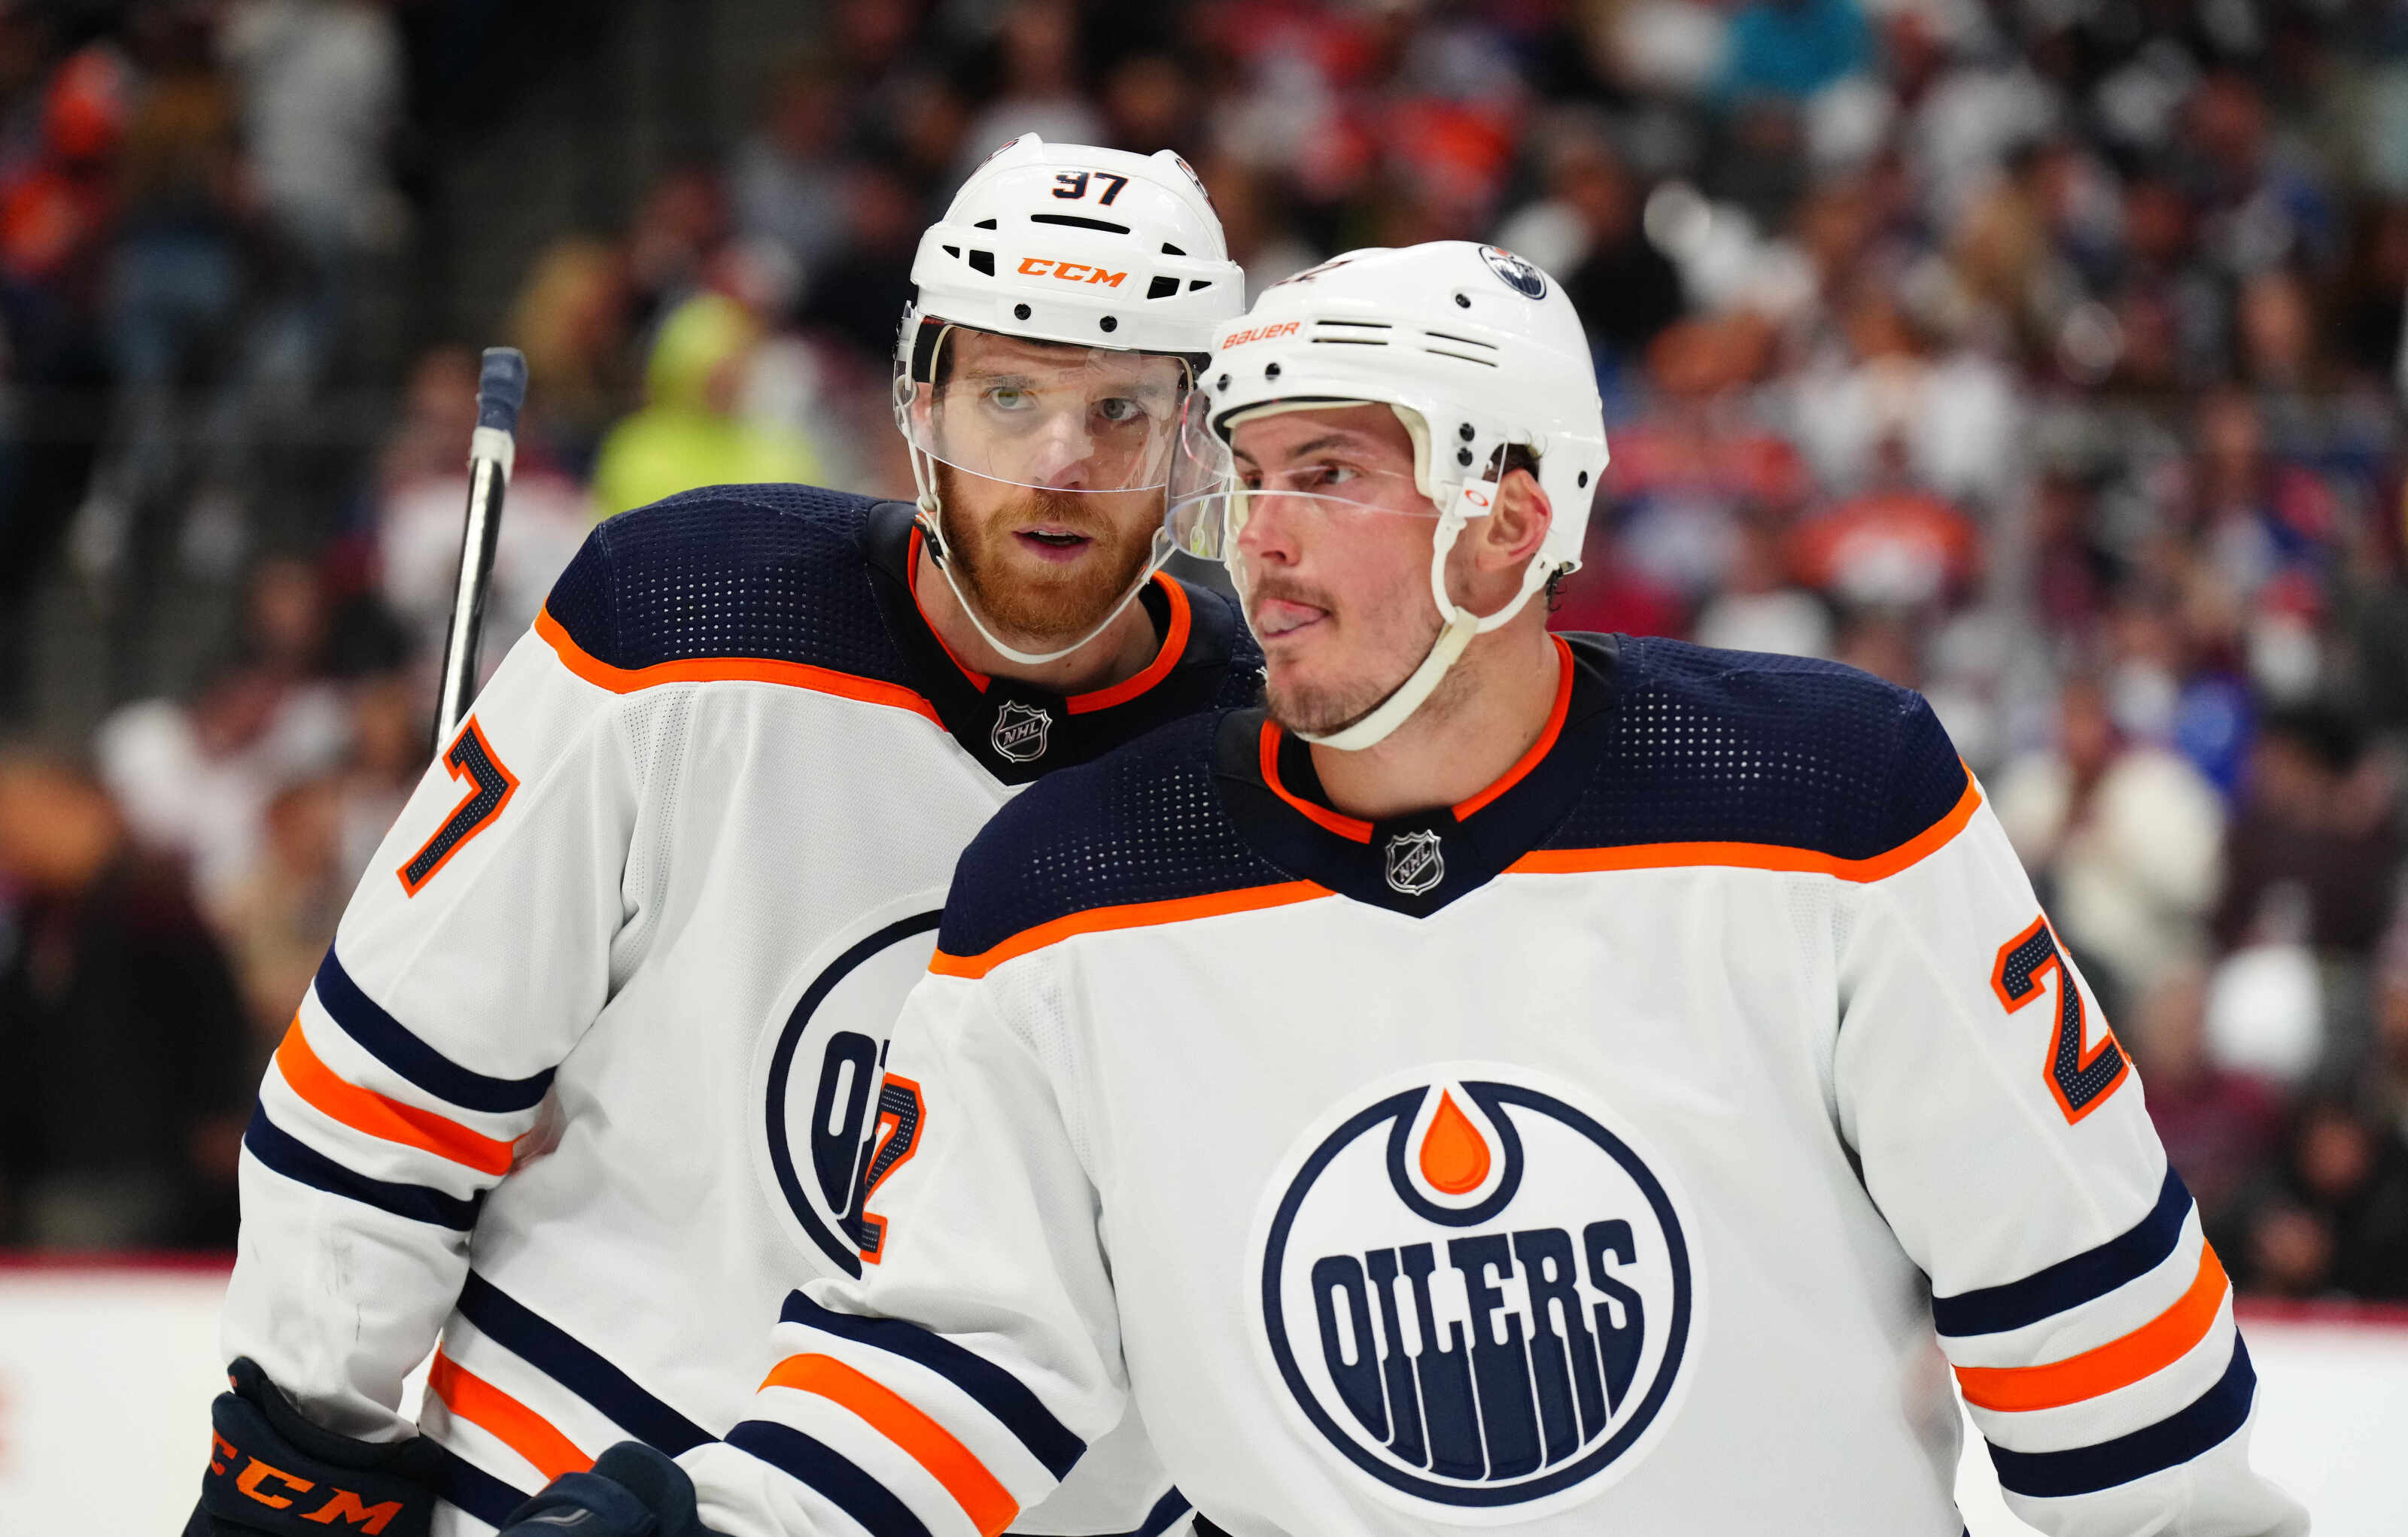 Connor McDavid's First Goal Jersey Could Bring $300,000